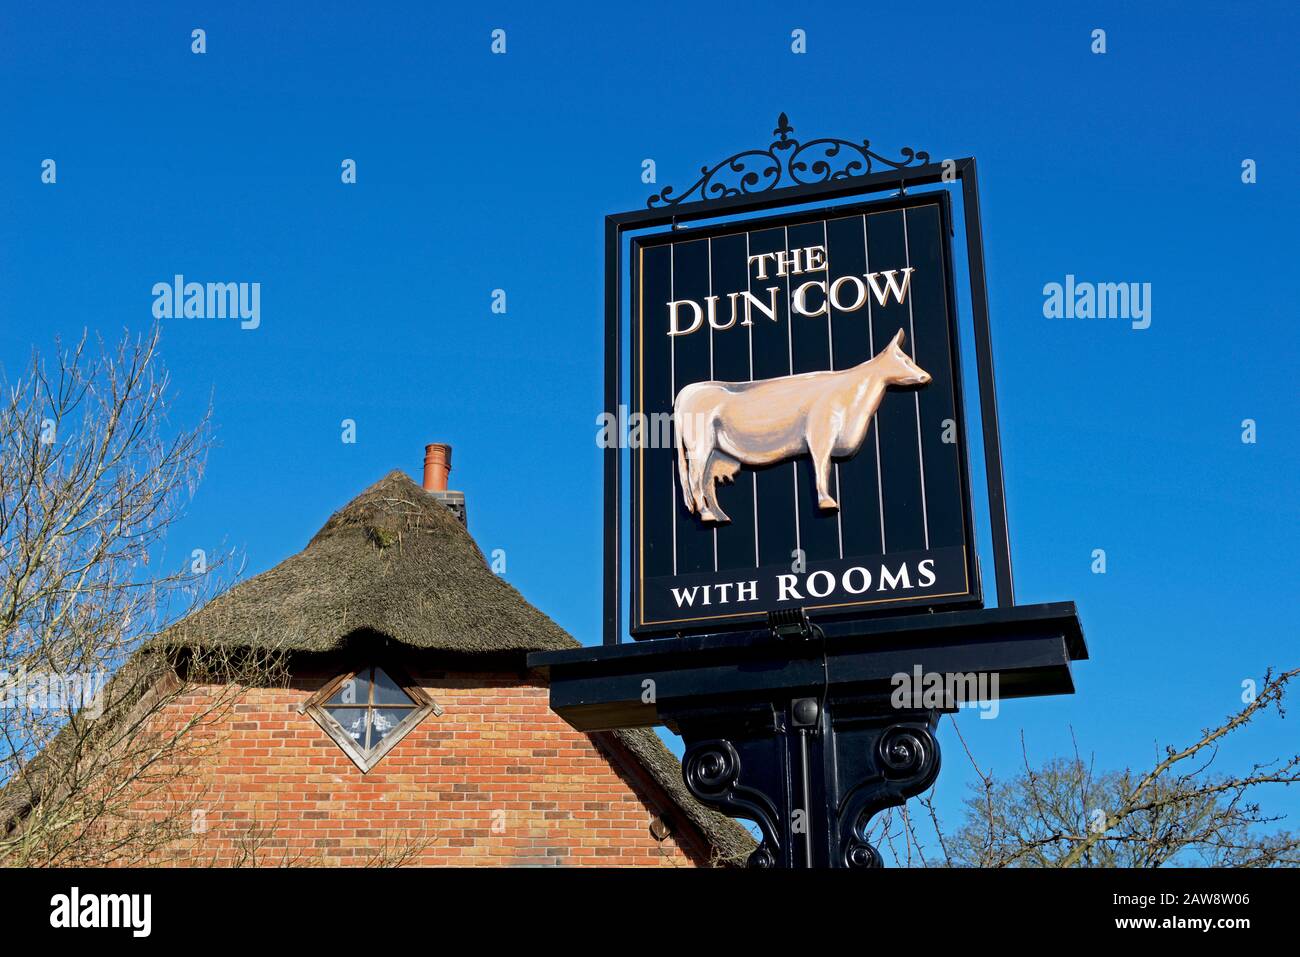 Sign for the Dun Cow pub in Dunchurch, Warwickshire, England UK Stock Photo